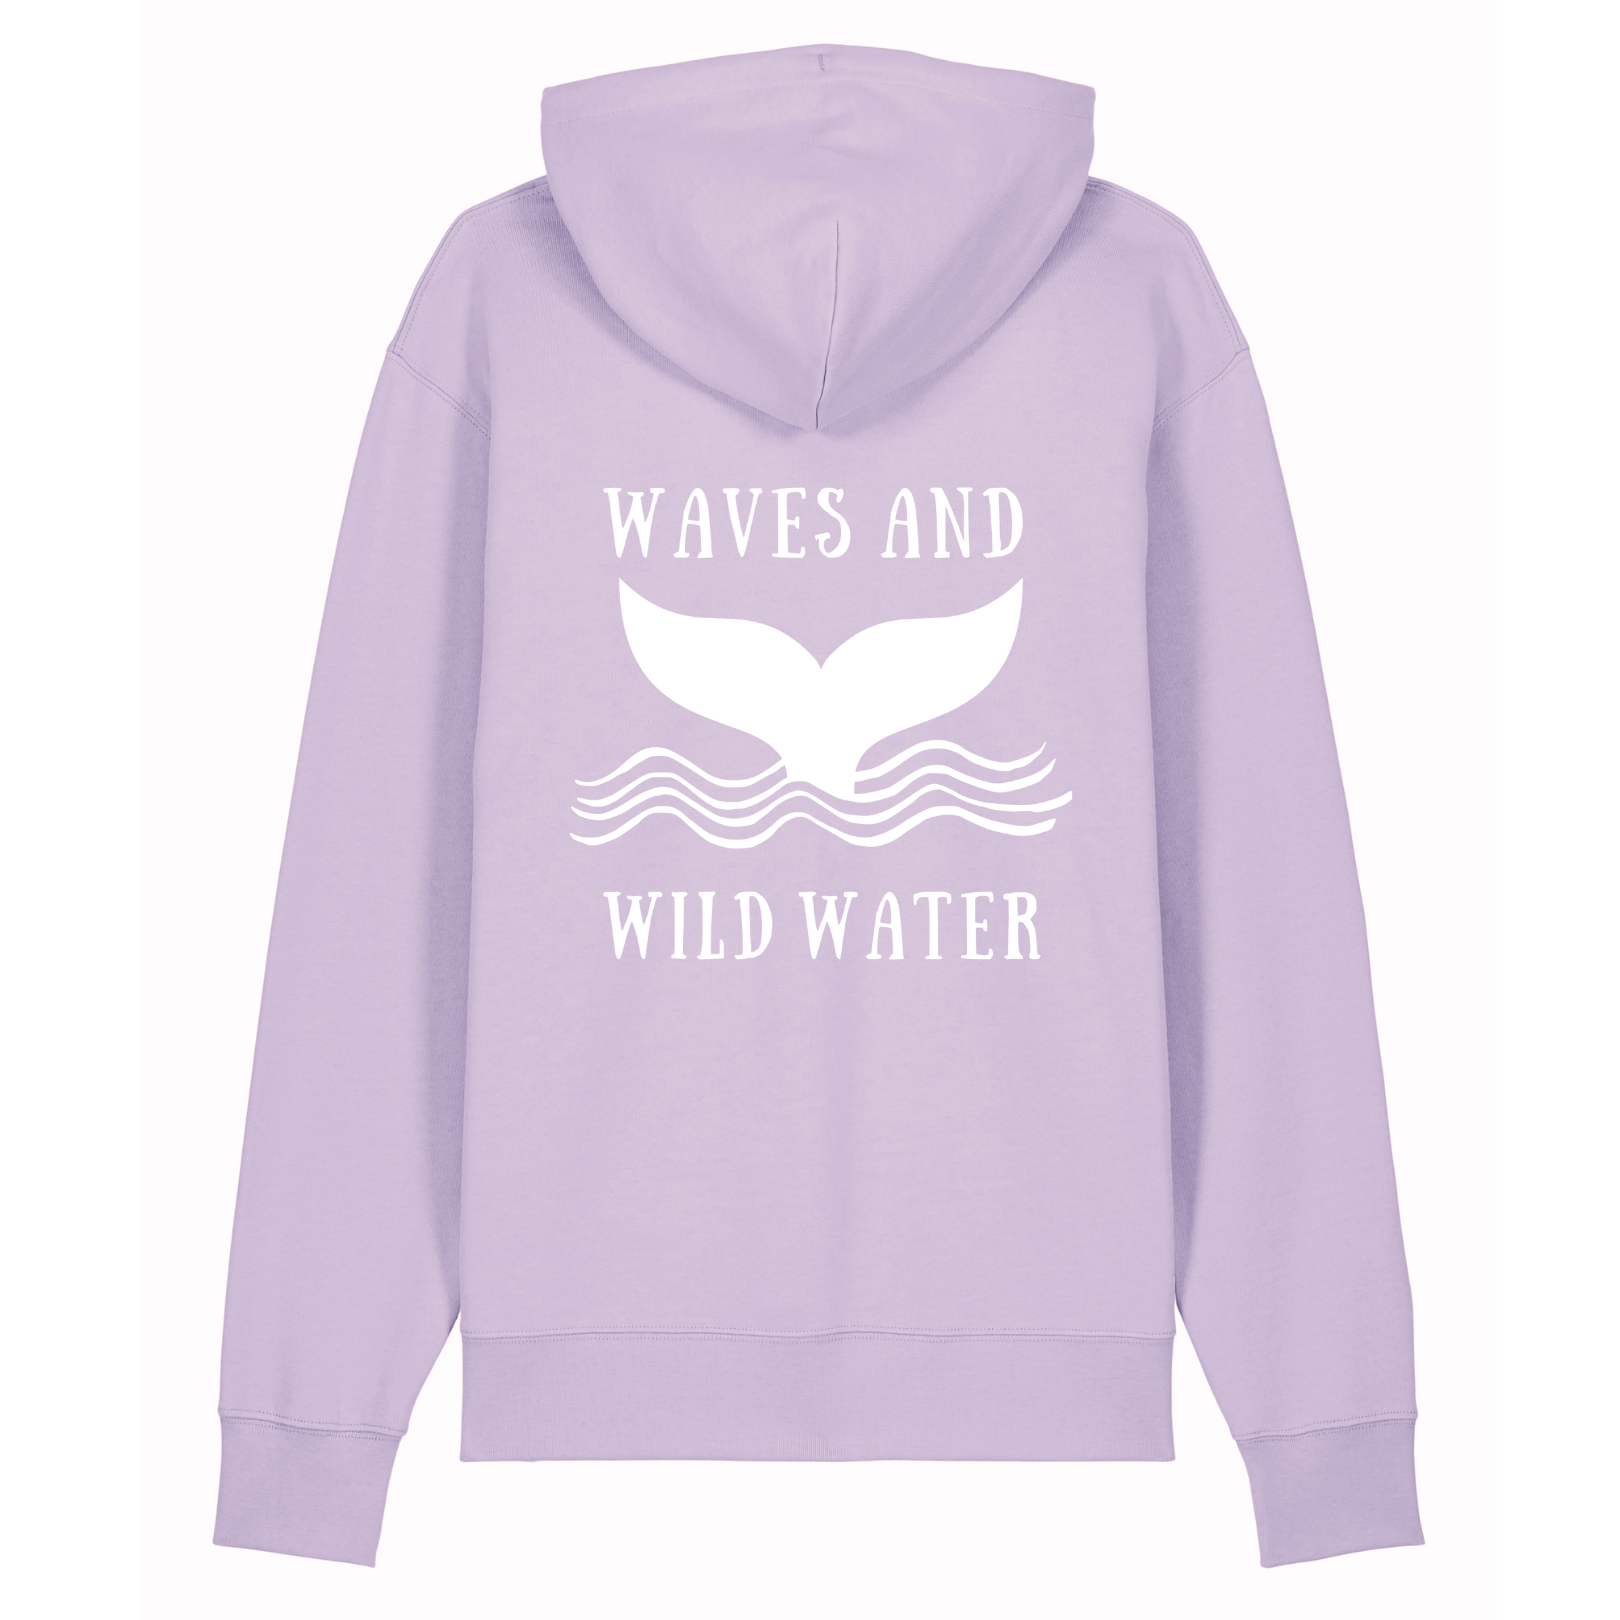 The beautiful lavender shade of this Beach Hut Hoodie compliments the white hand printed Waves and Wild Water logo perfectly. The logo depicts a large whale tail emerging from the waves, making this hoodie a great gift for any wild swimmer looking for something a little different.